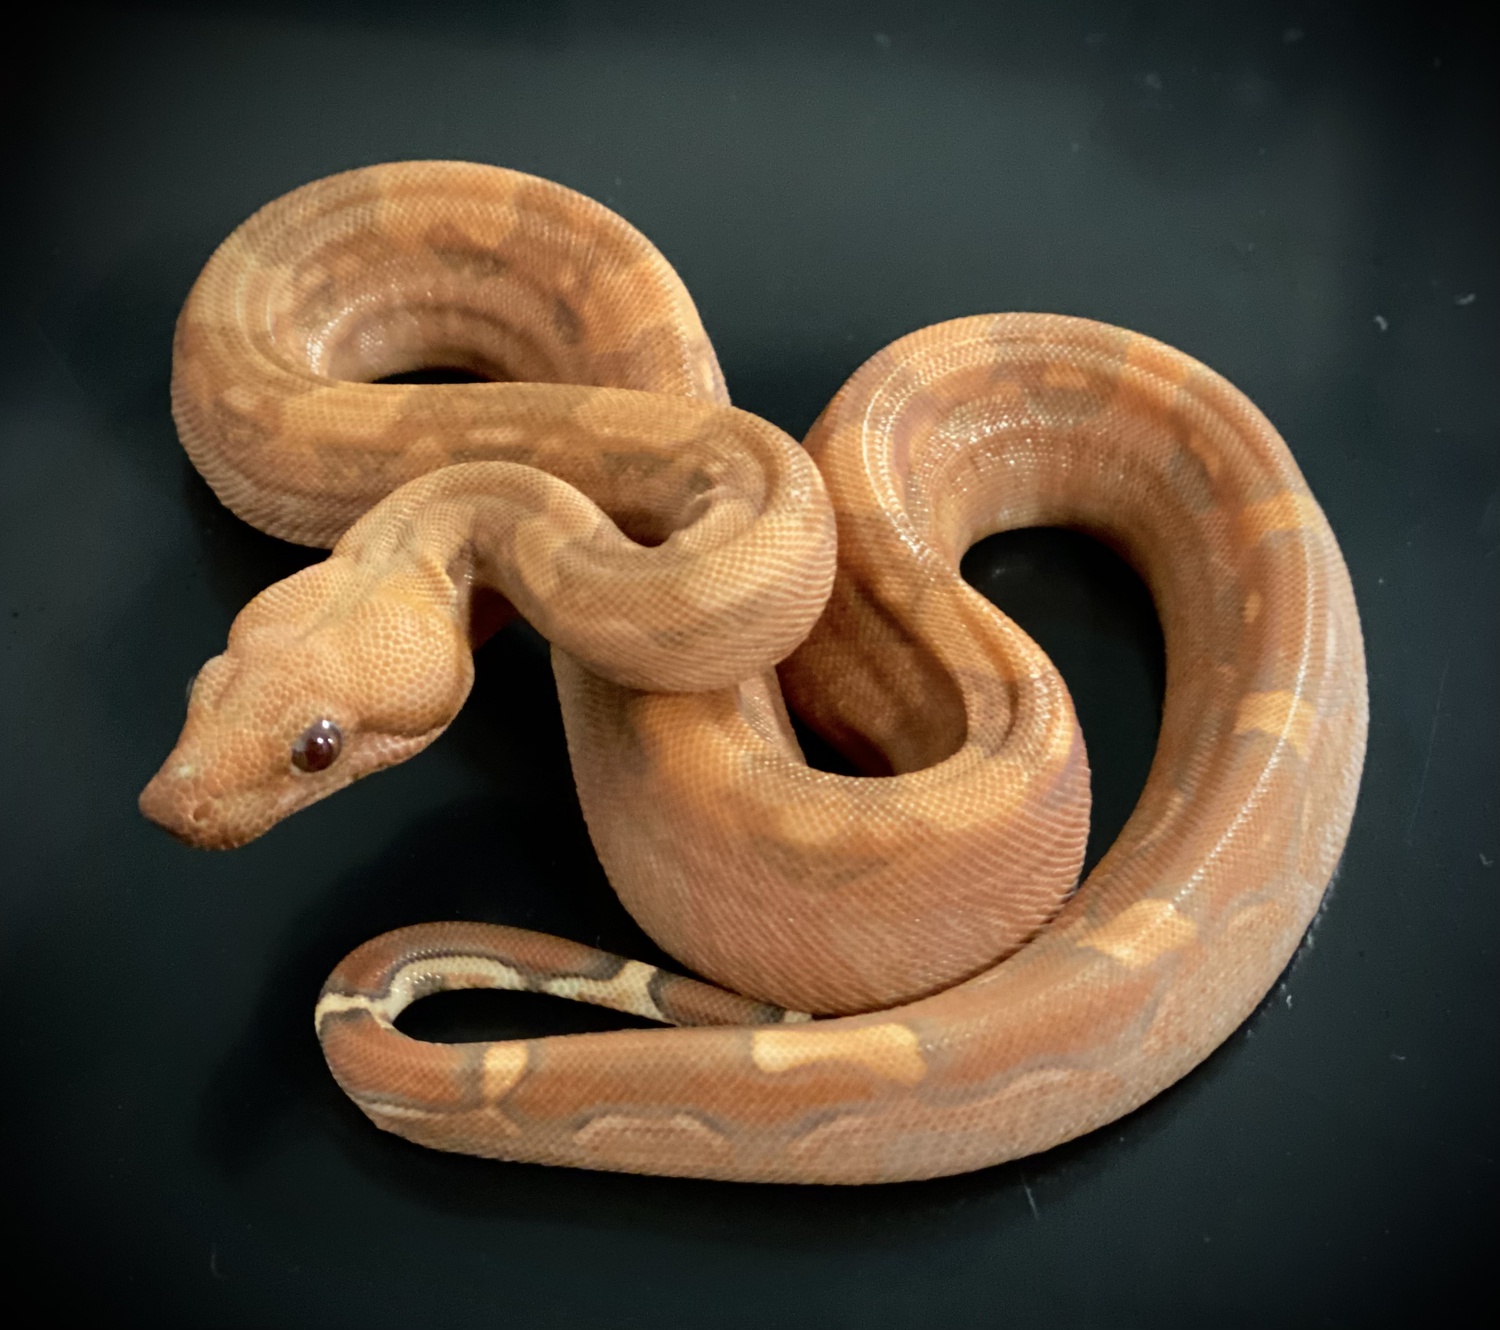 Vpi Berry Blood Boa Constrictor by Nordic Boas